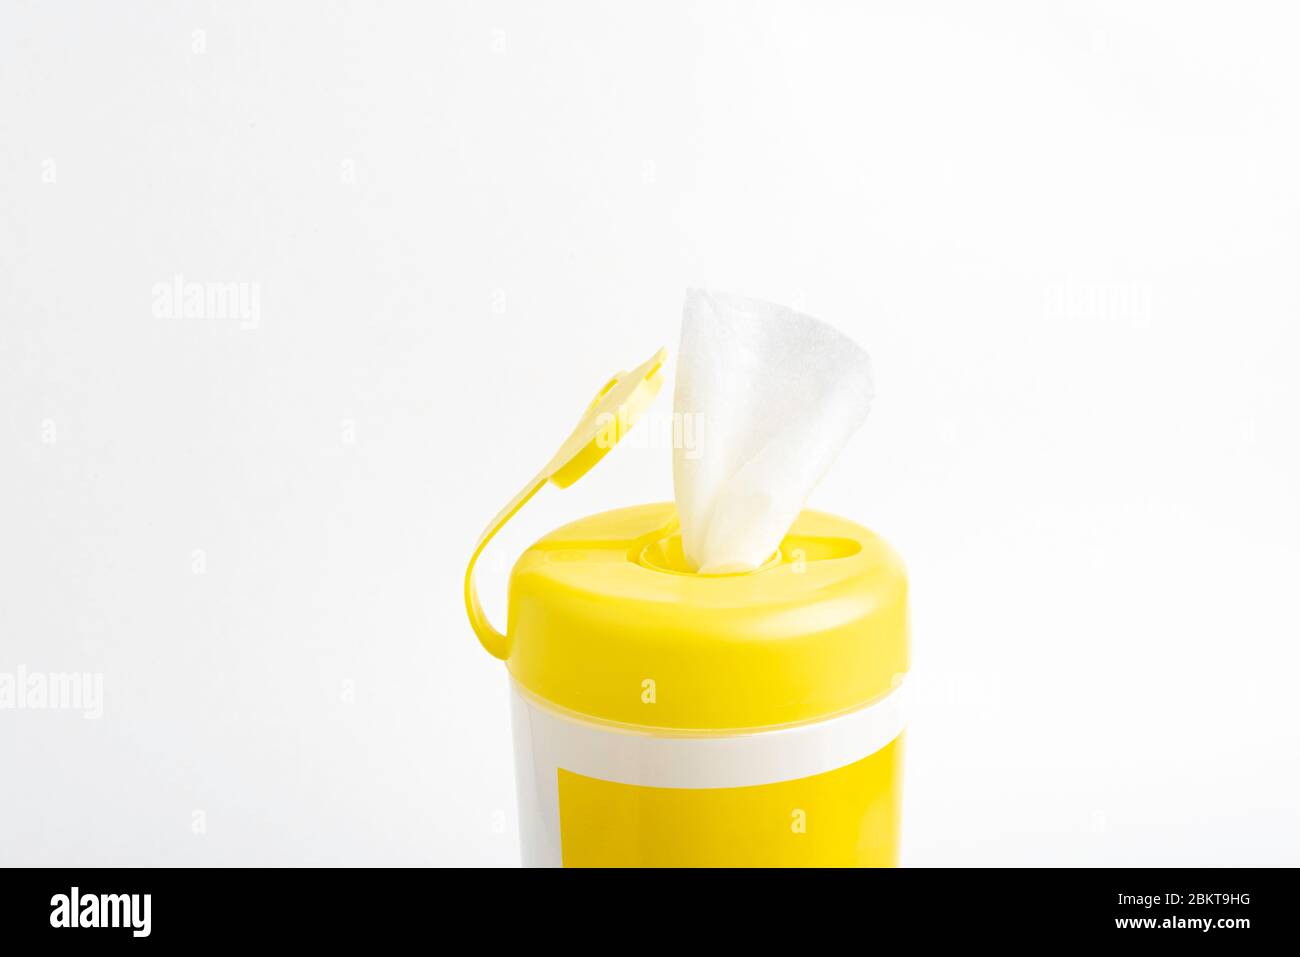 Download Disinfectant Wipes High Resolution Stock Photography And Images Alamy Yellowimages Mockups